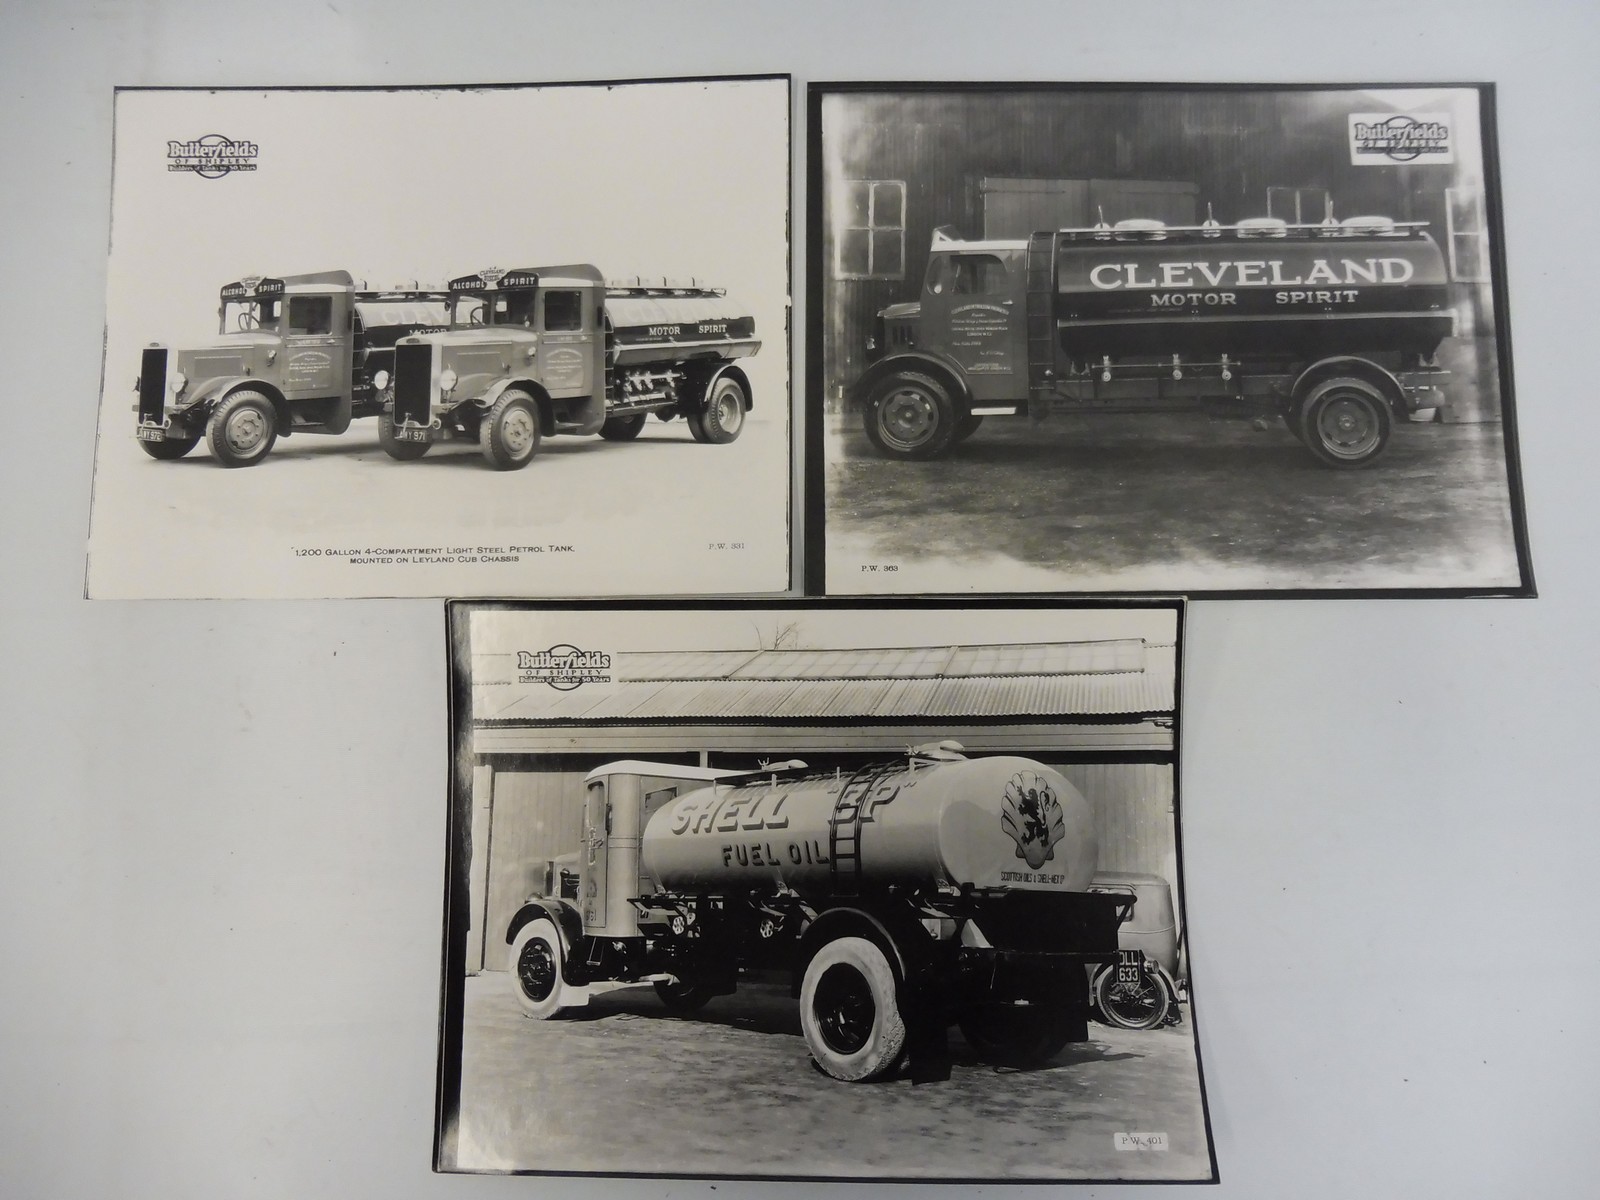 Three black and white photographs from Butterfields of Shipley, two depicting tankers carrying